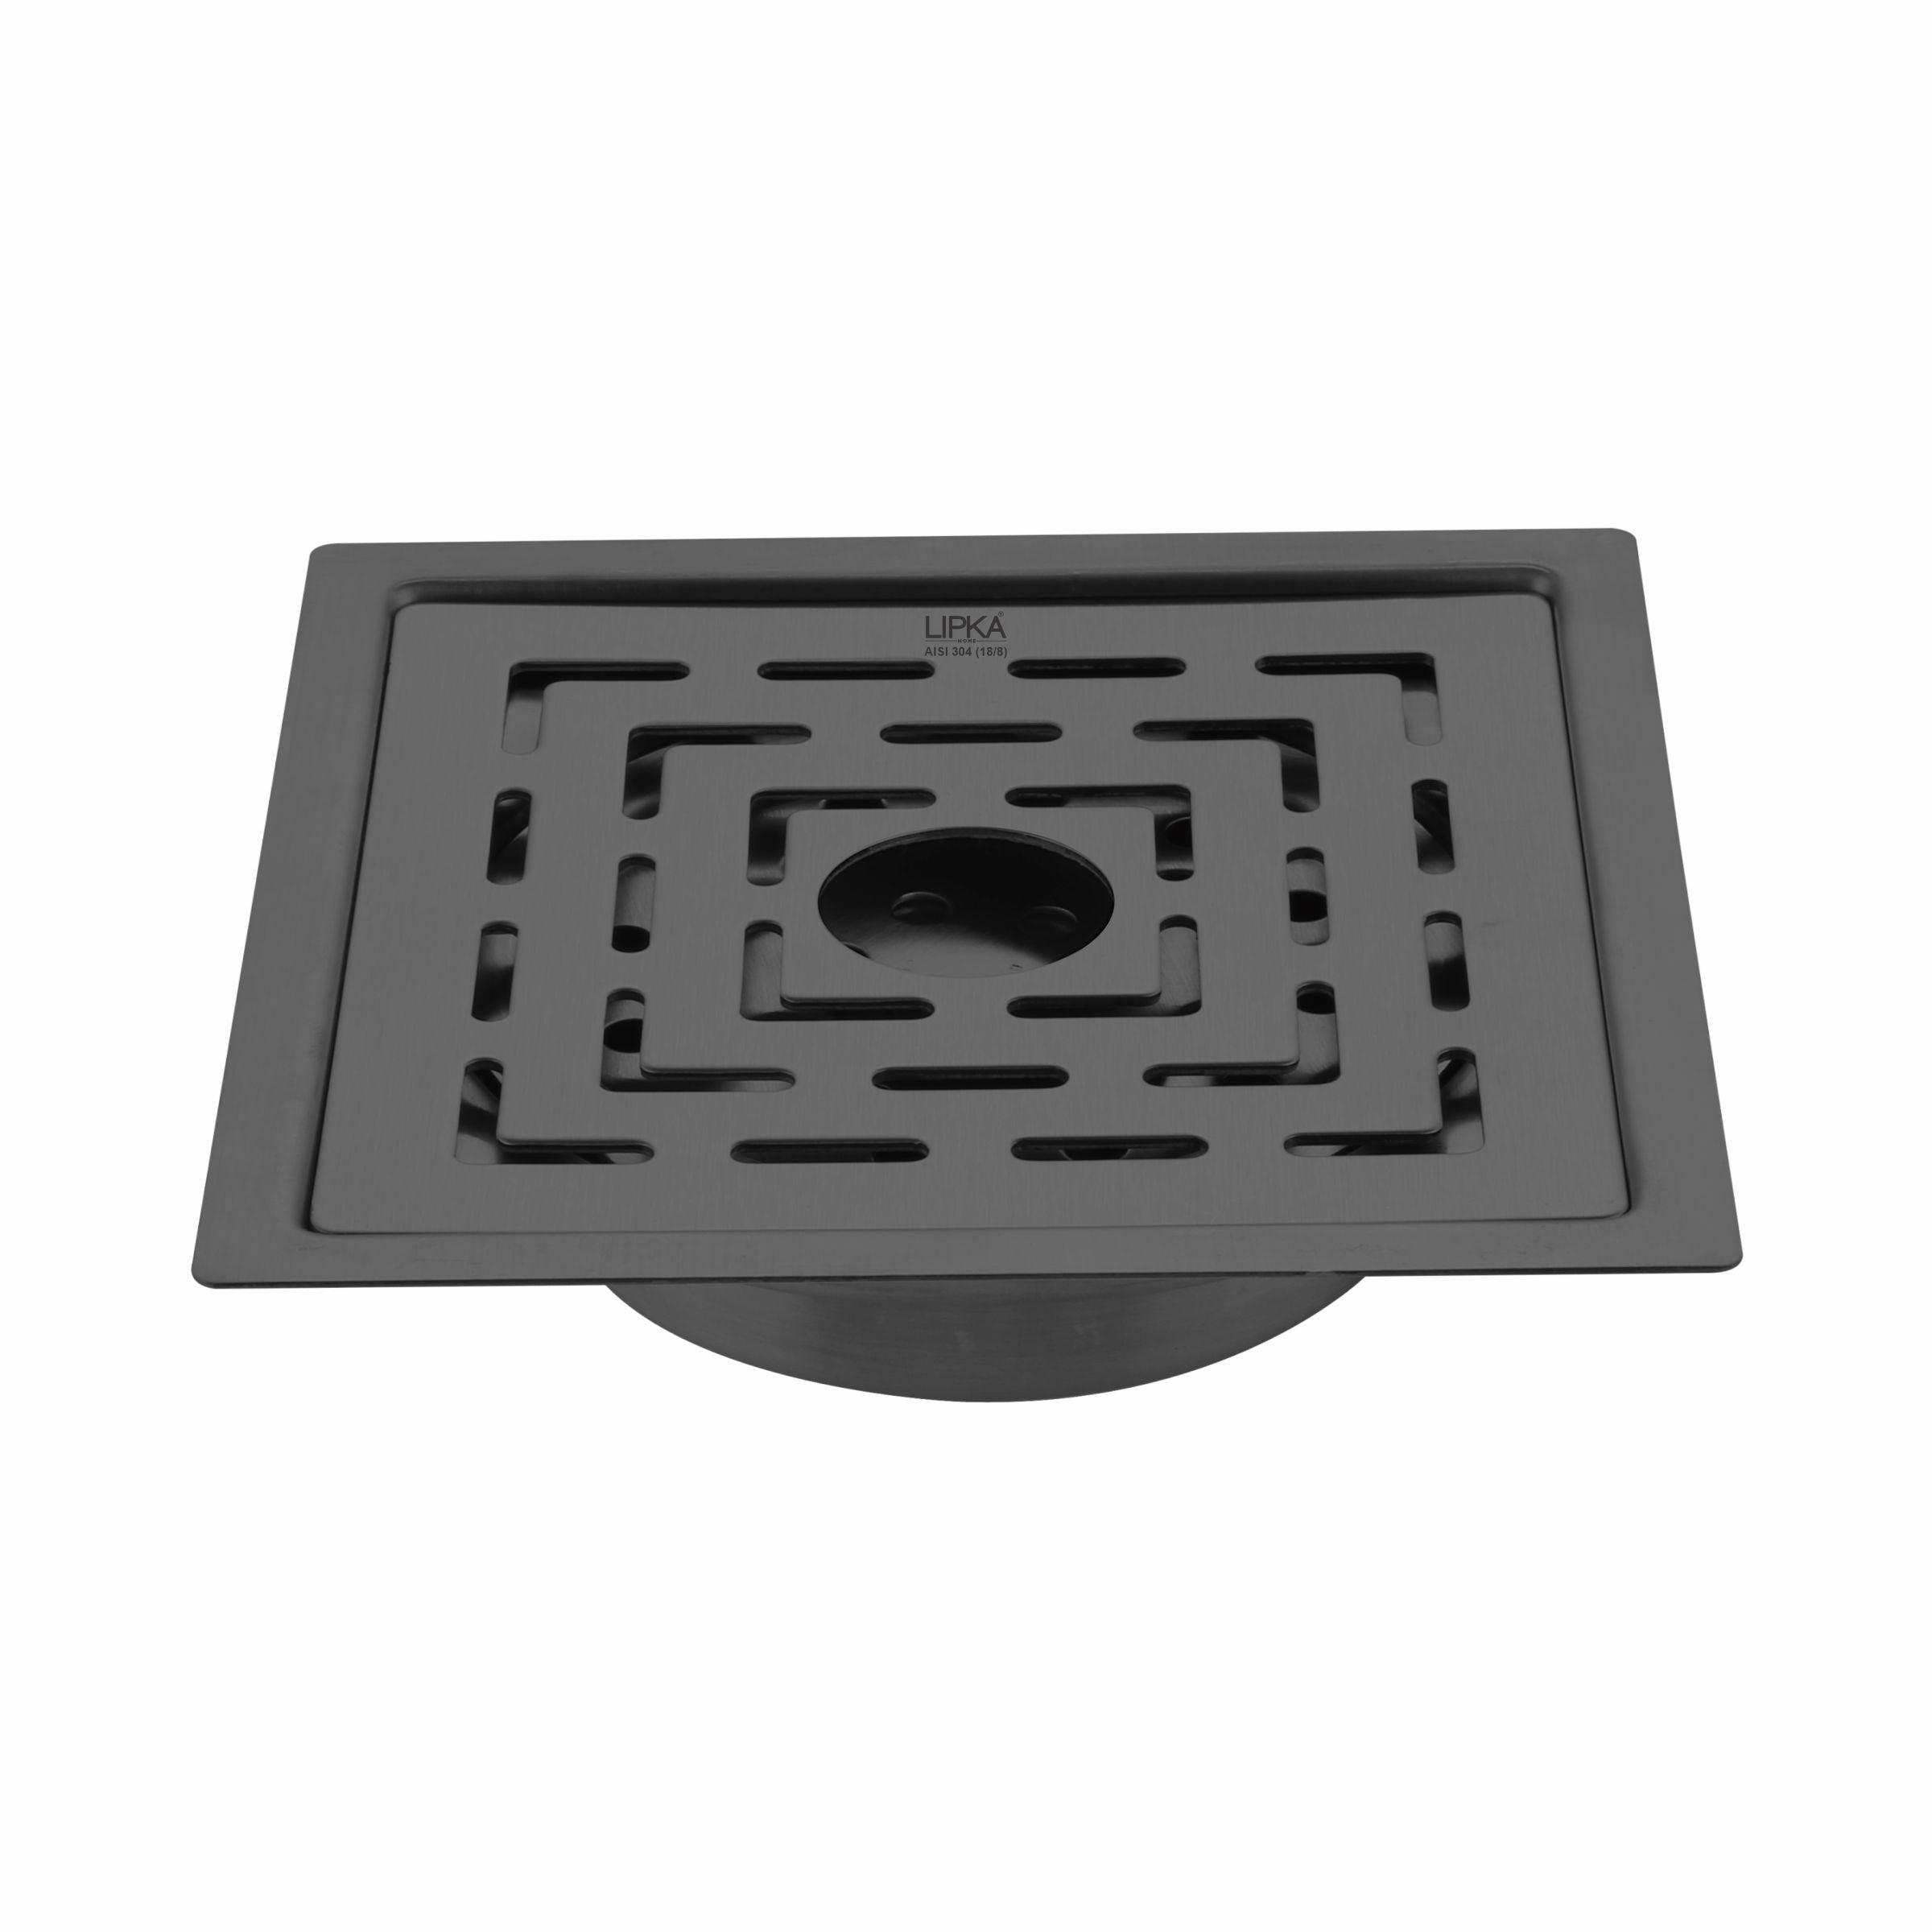 Orange Flat Cut Exclusive Square Floor Drain in Black PVD Coating (5 x 5 Inches) with Hole & Cockroach Trap